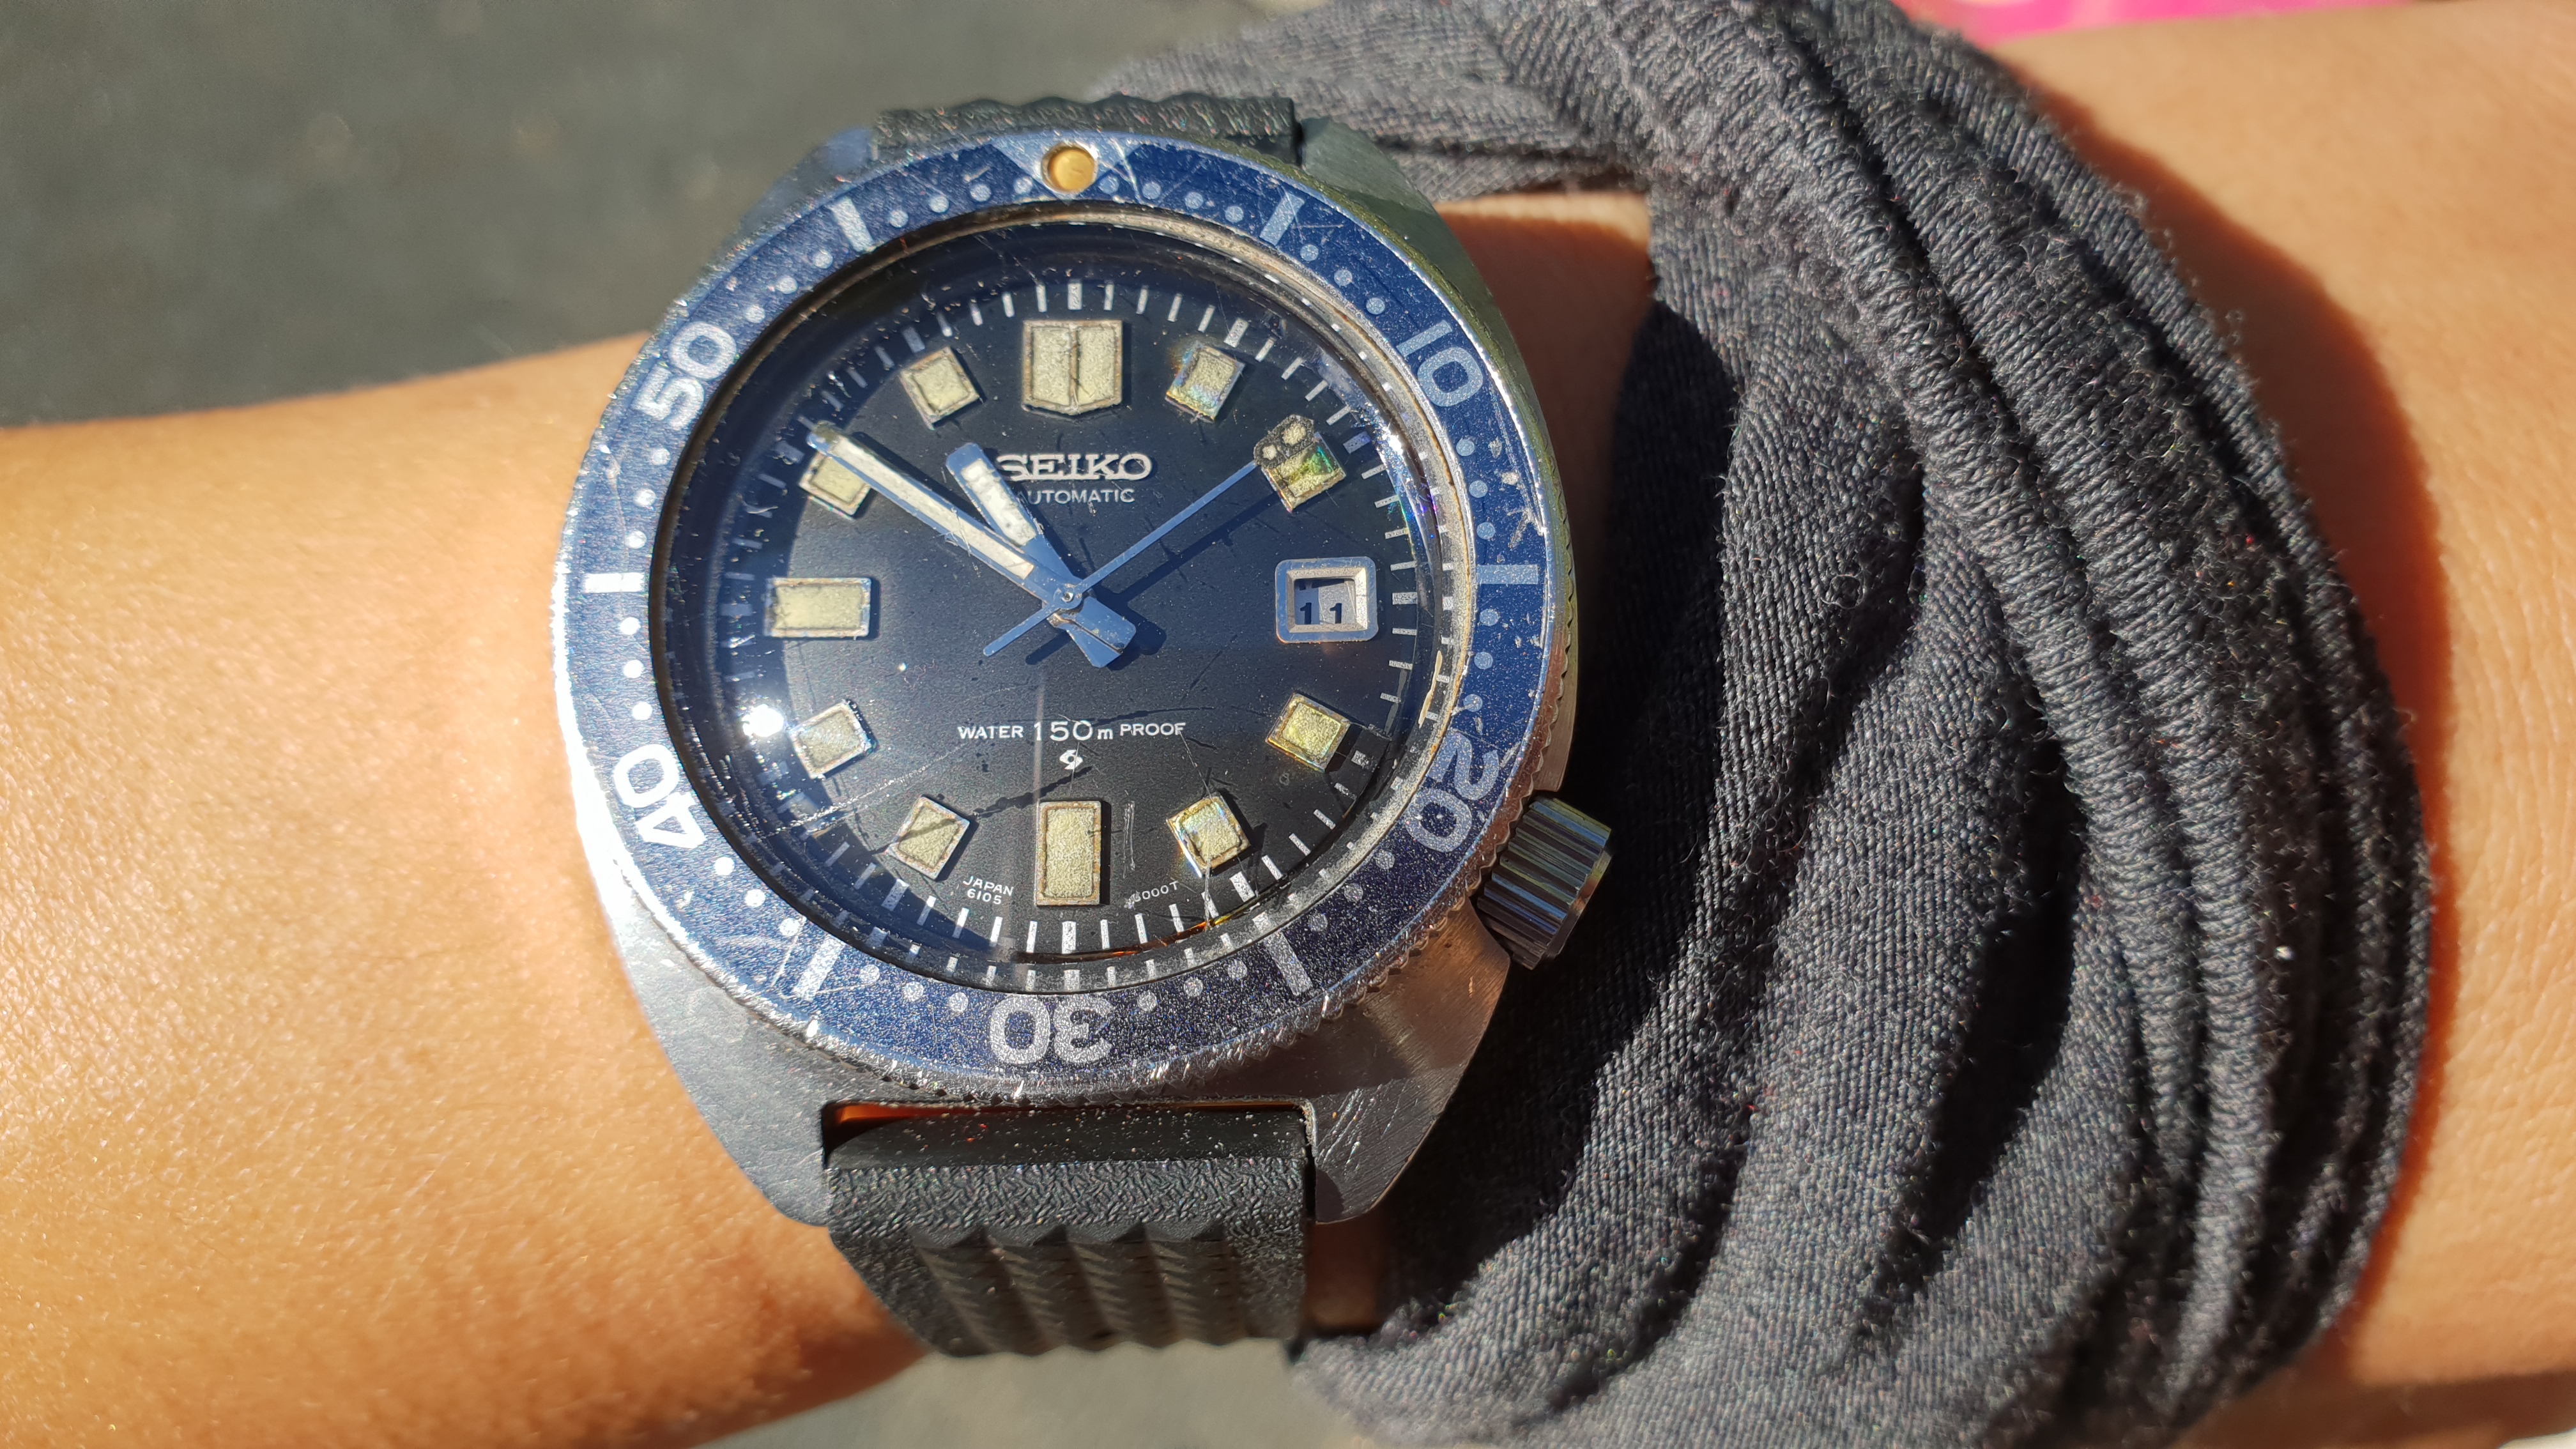 SOLD - 1969 Seiko 6105-8000 Diver's - PROOF/PROOF, Ghosted Bezel $900USD |  Omega Forums